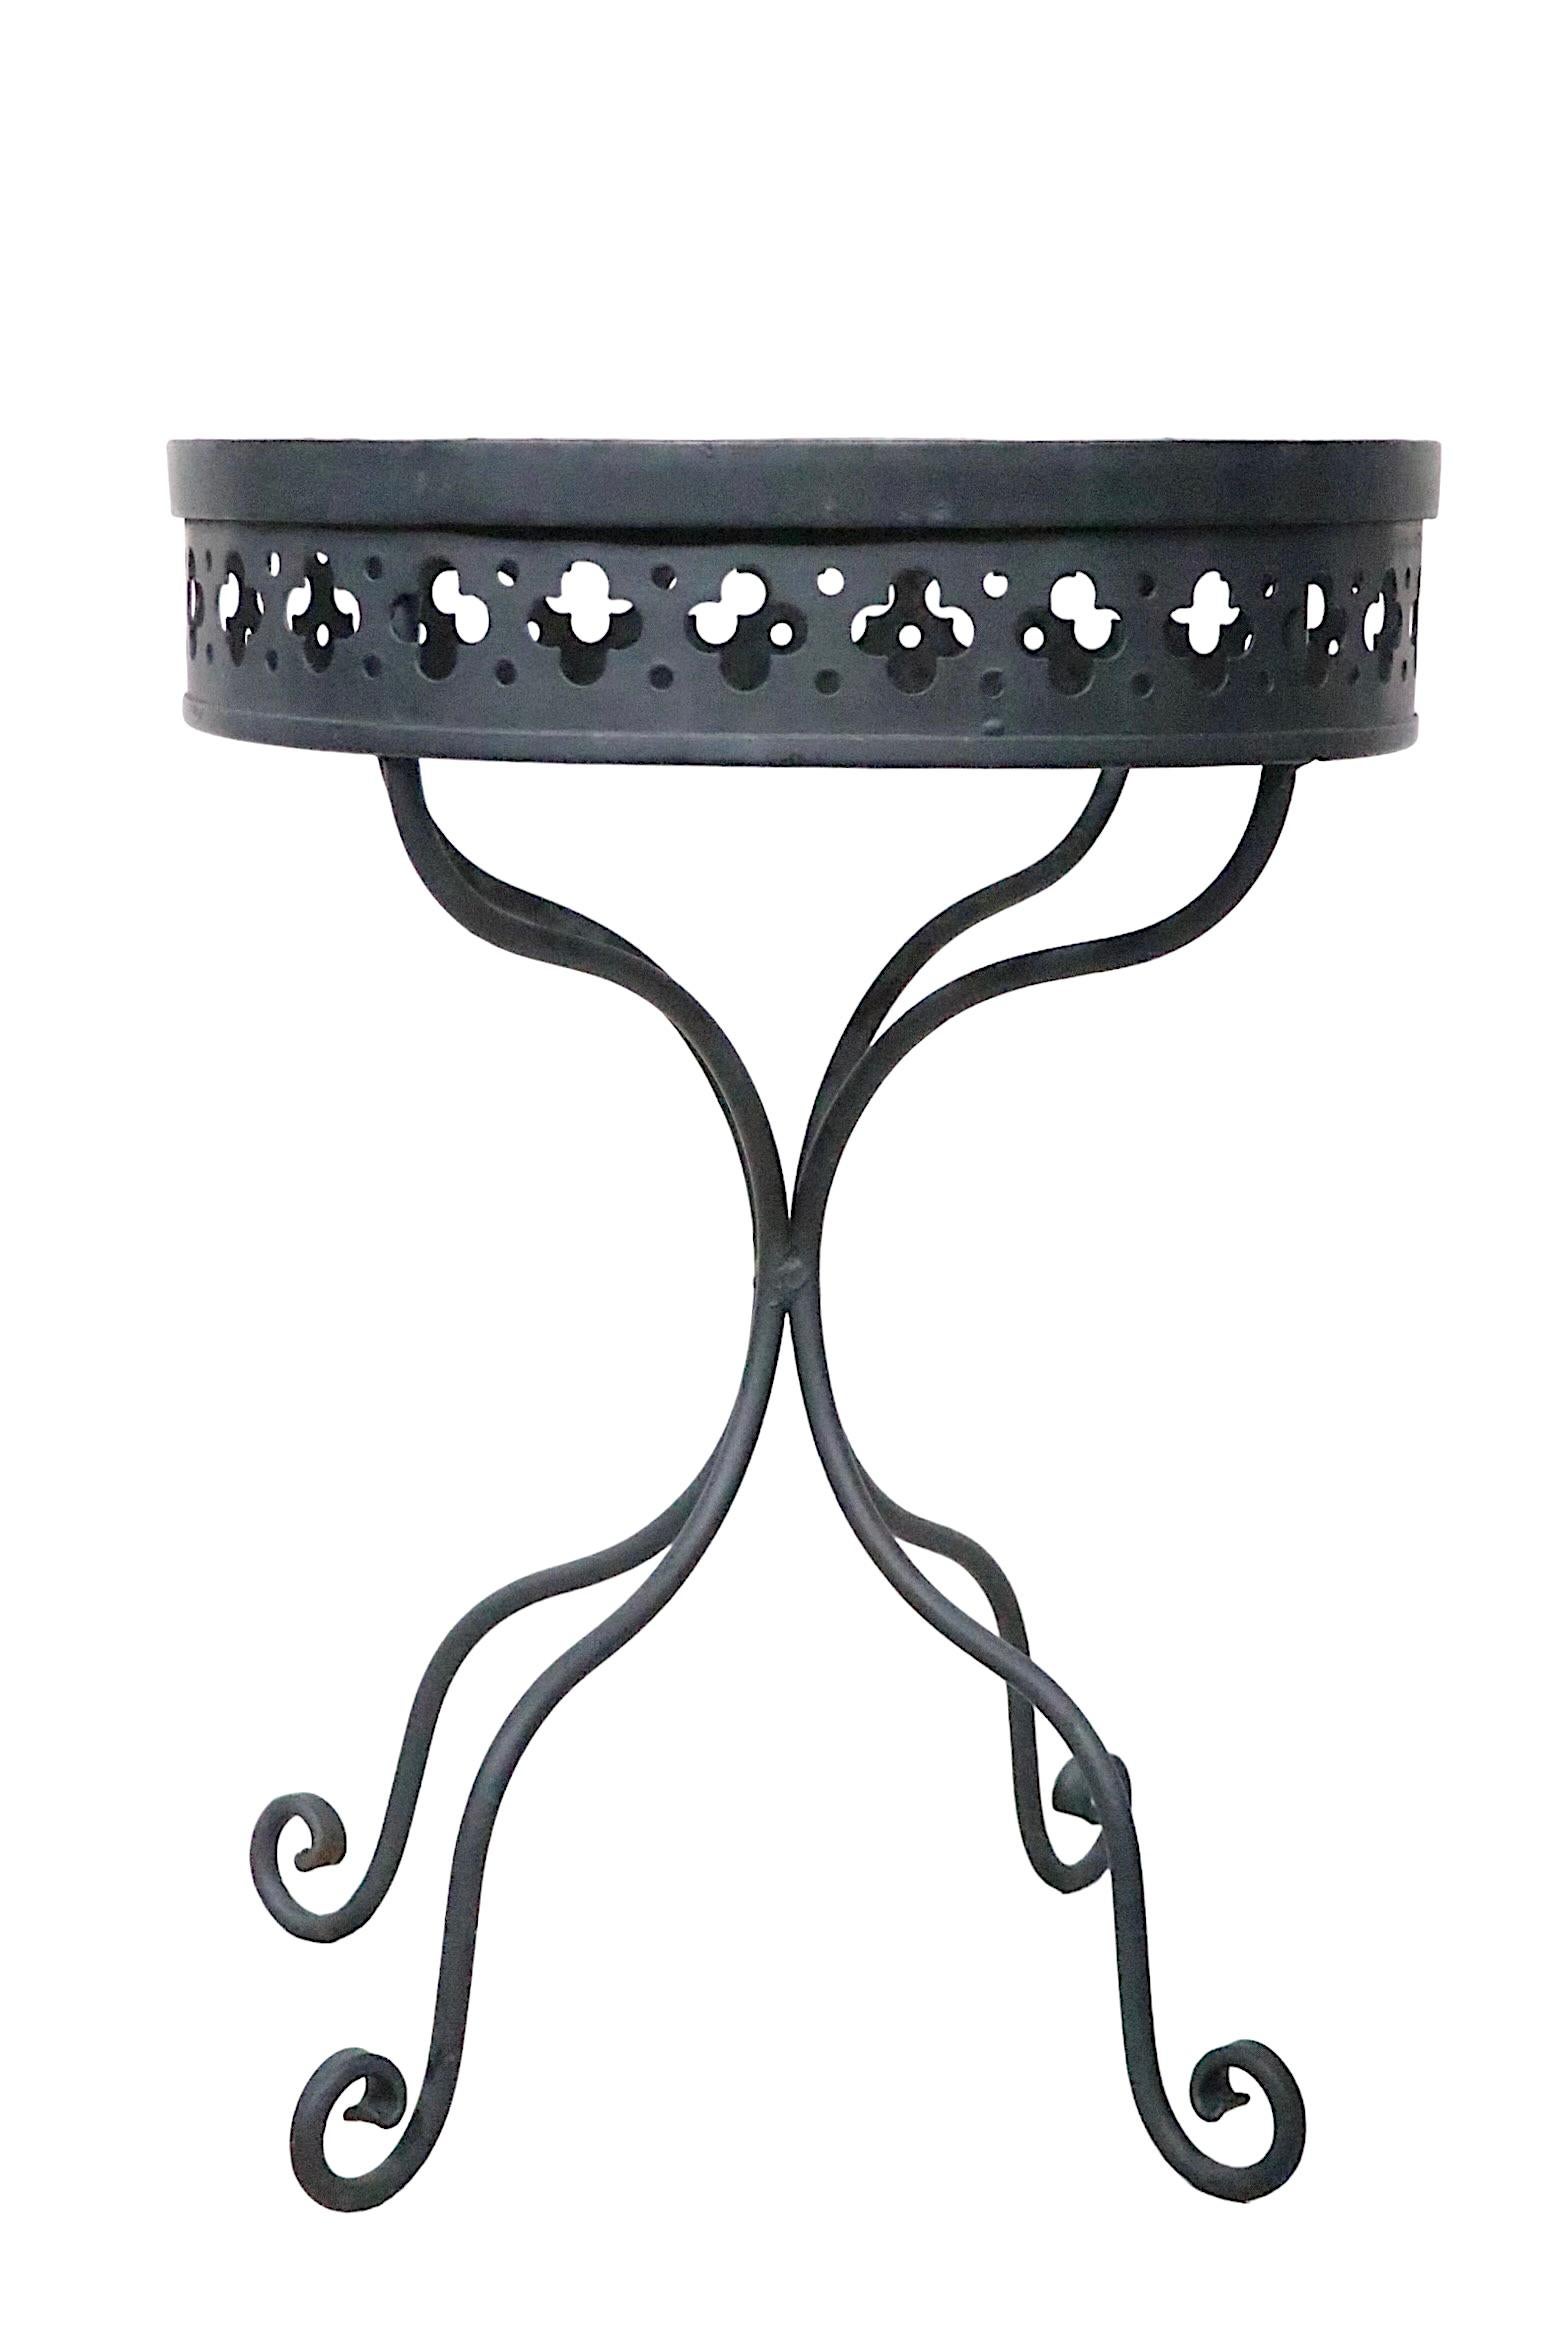 Wrought Iron and Metal Mesh Garden Patio Side End Table Taj Mahal by Salterini For Sale 3